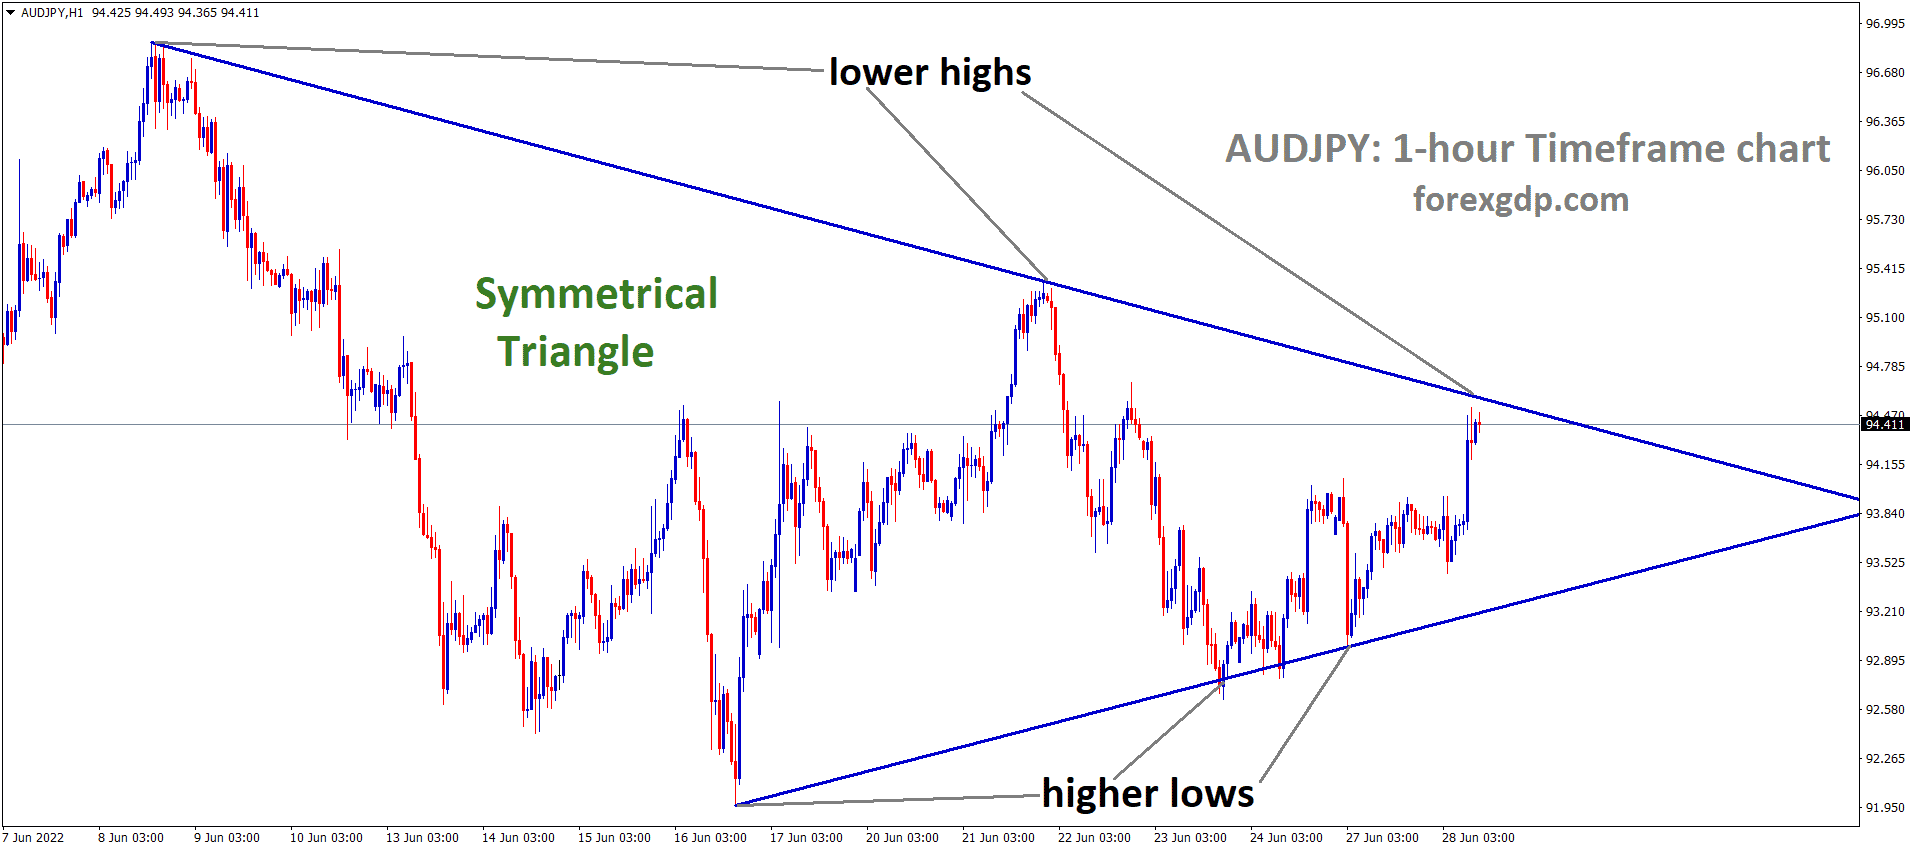 AUDJPY is moving in the Symmetrical triangle pattern and the Market has reached the Top area of the Pattern 1